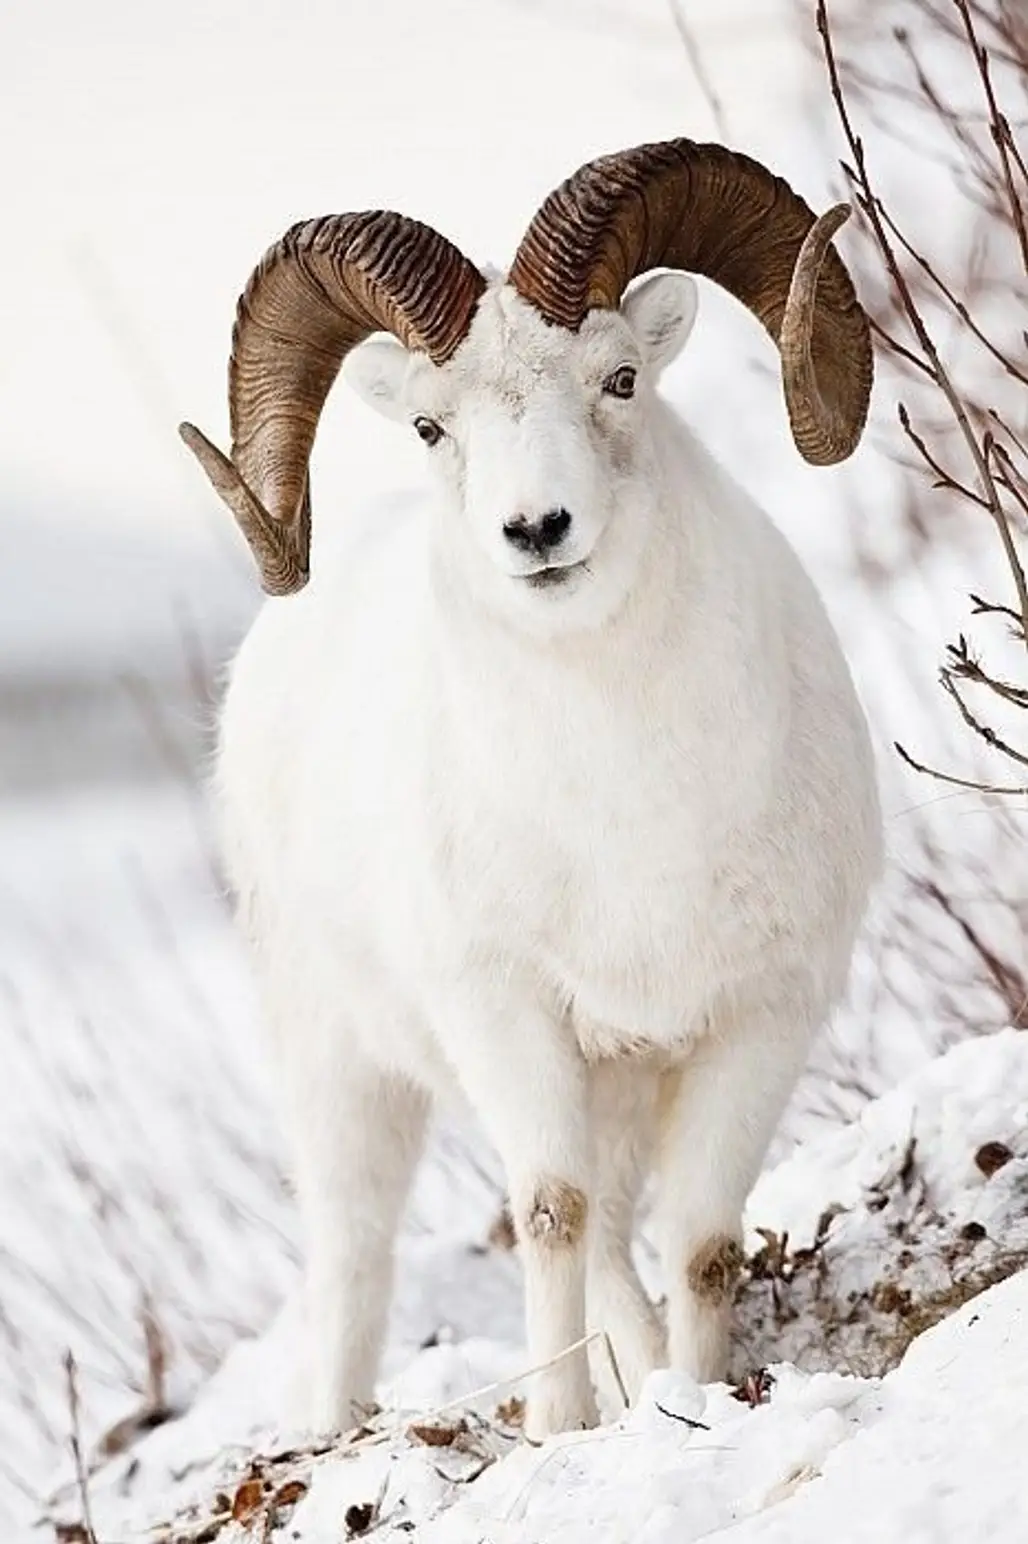 "Pleased to Meet You. I'm a Dall Sheep"